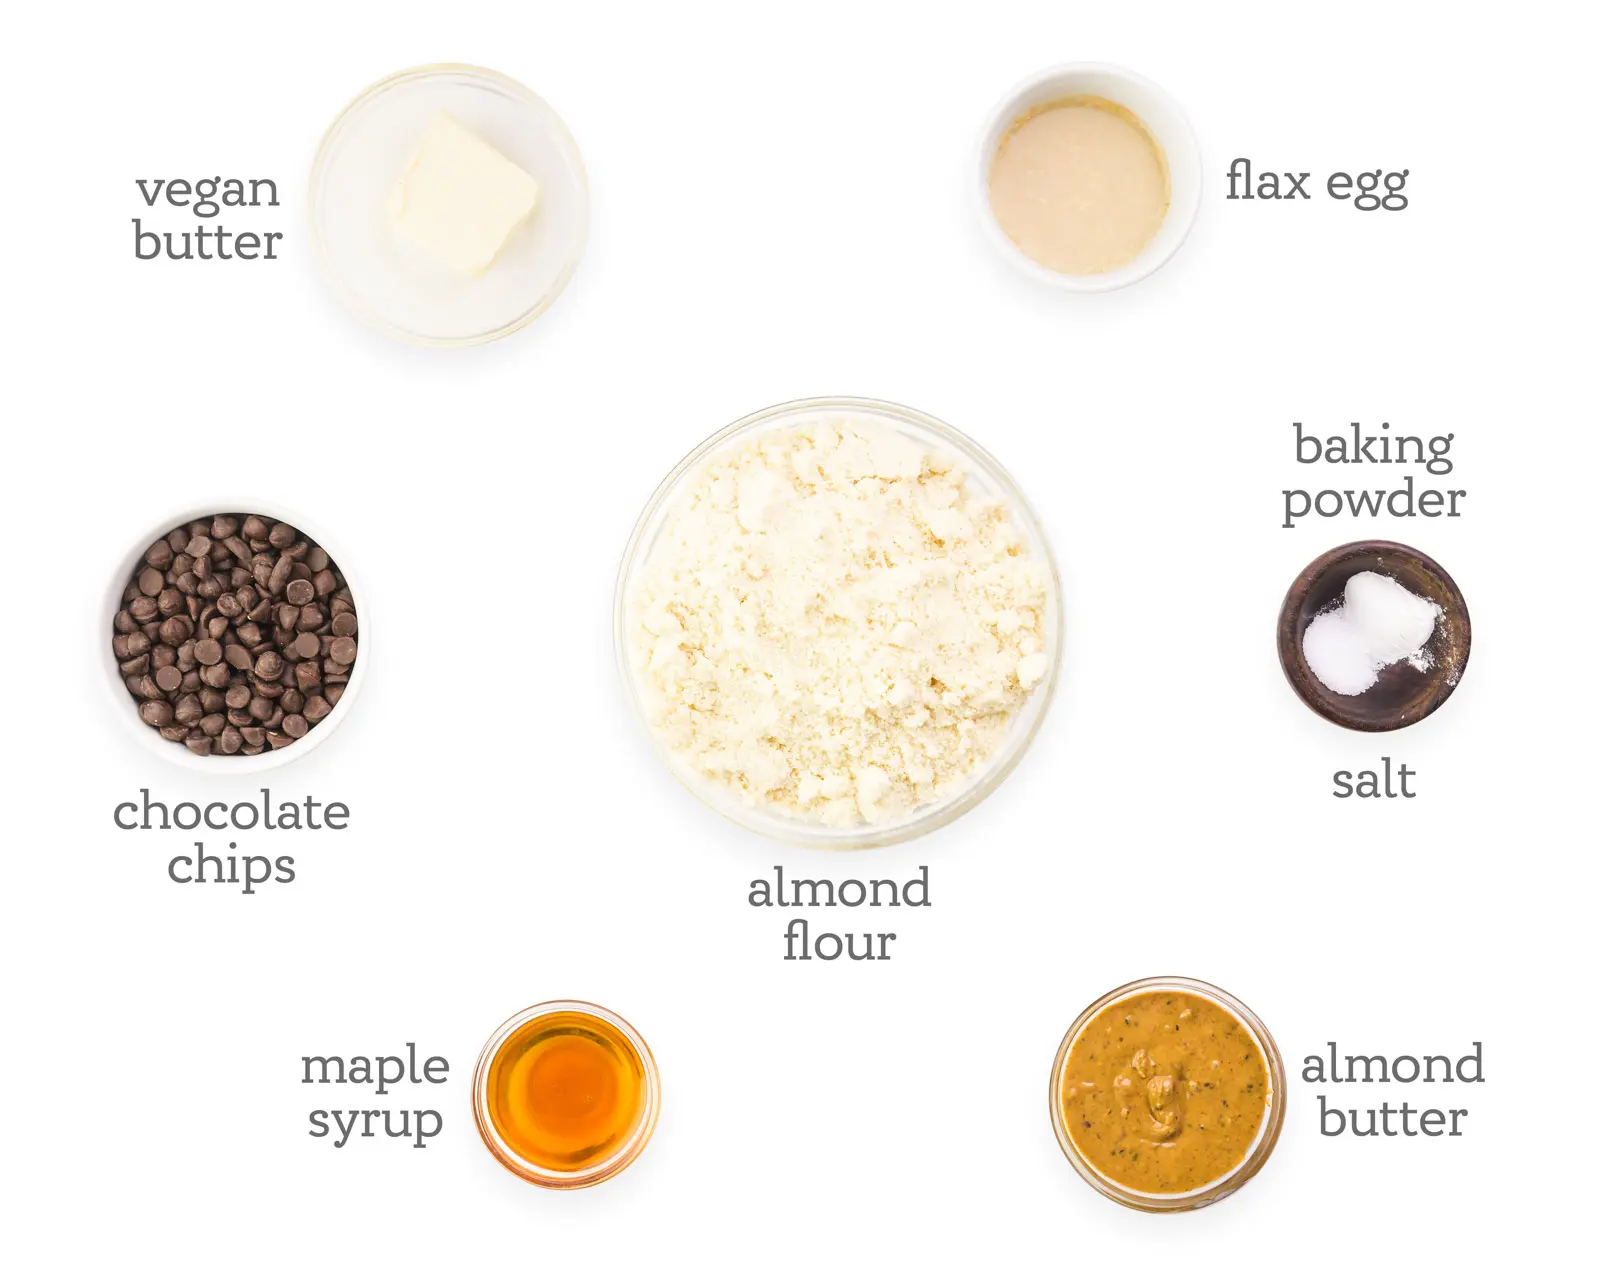 Ingredients in bowls are laid out on a white table. The ingredients next to the ingredients read, flax egg, baking powder, salt, almond butter, almond flour, maple syrup, chocolate chips, and vegan butter.